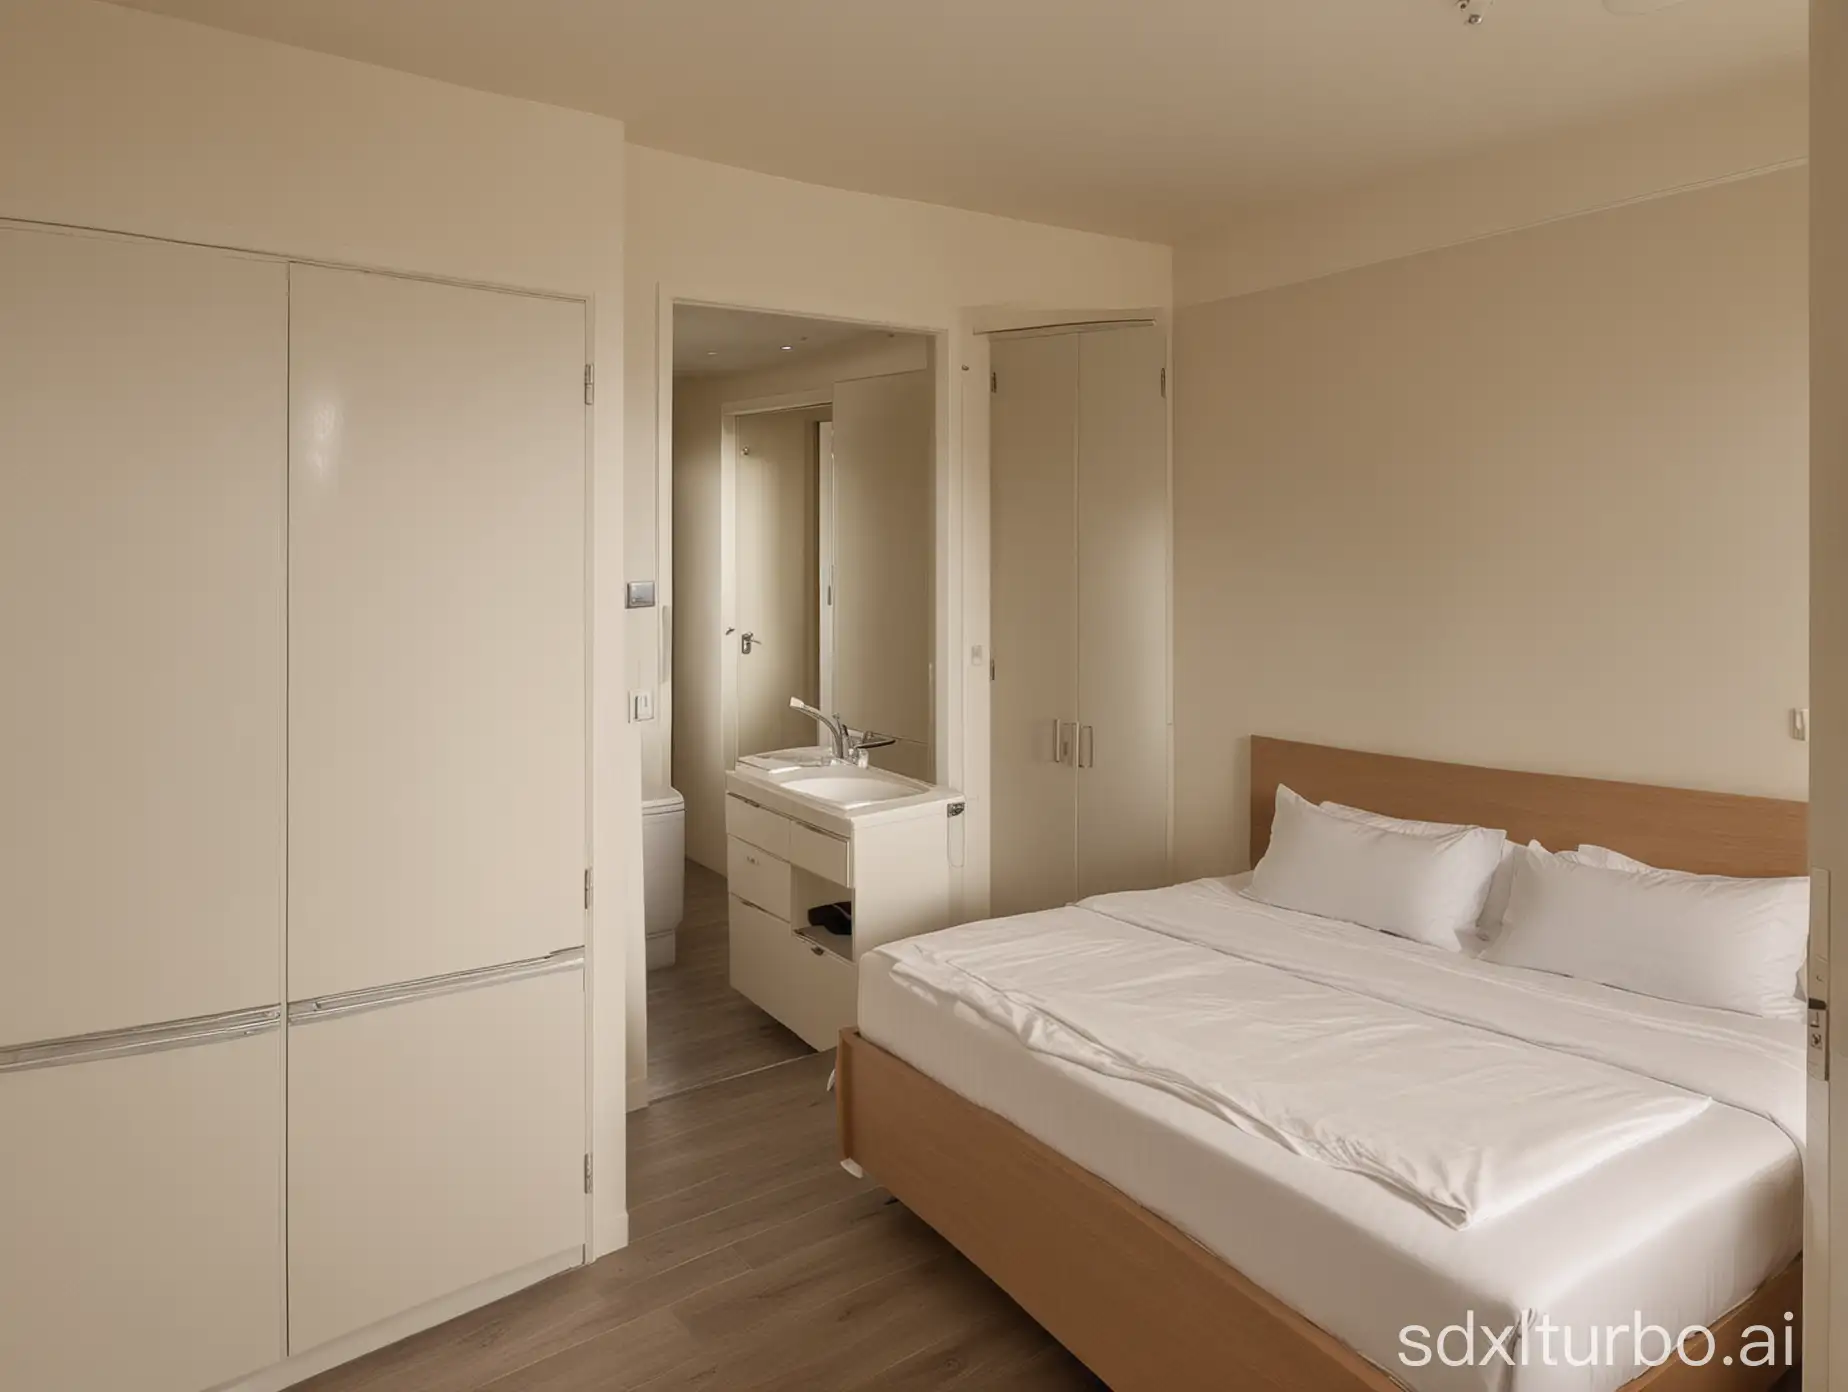 A suite has a bed and a small kitchen, with the bathroom separated from the other rooms.